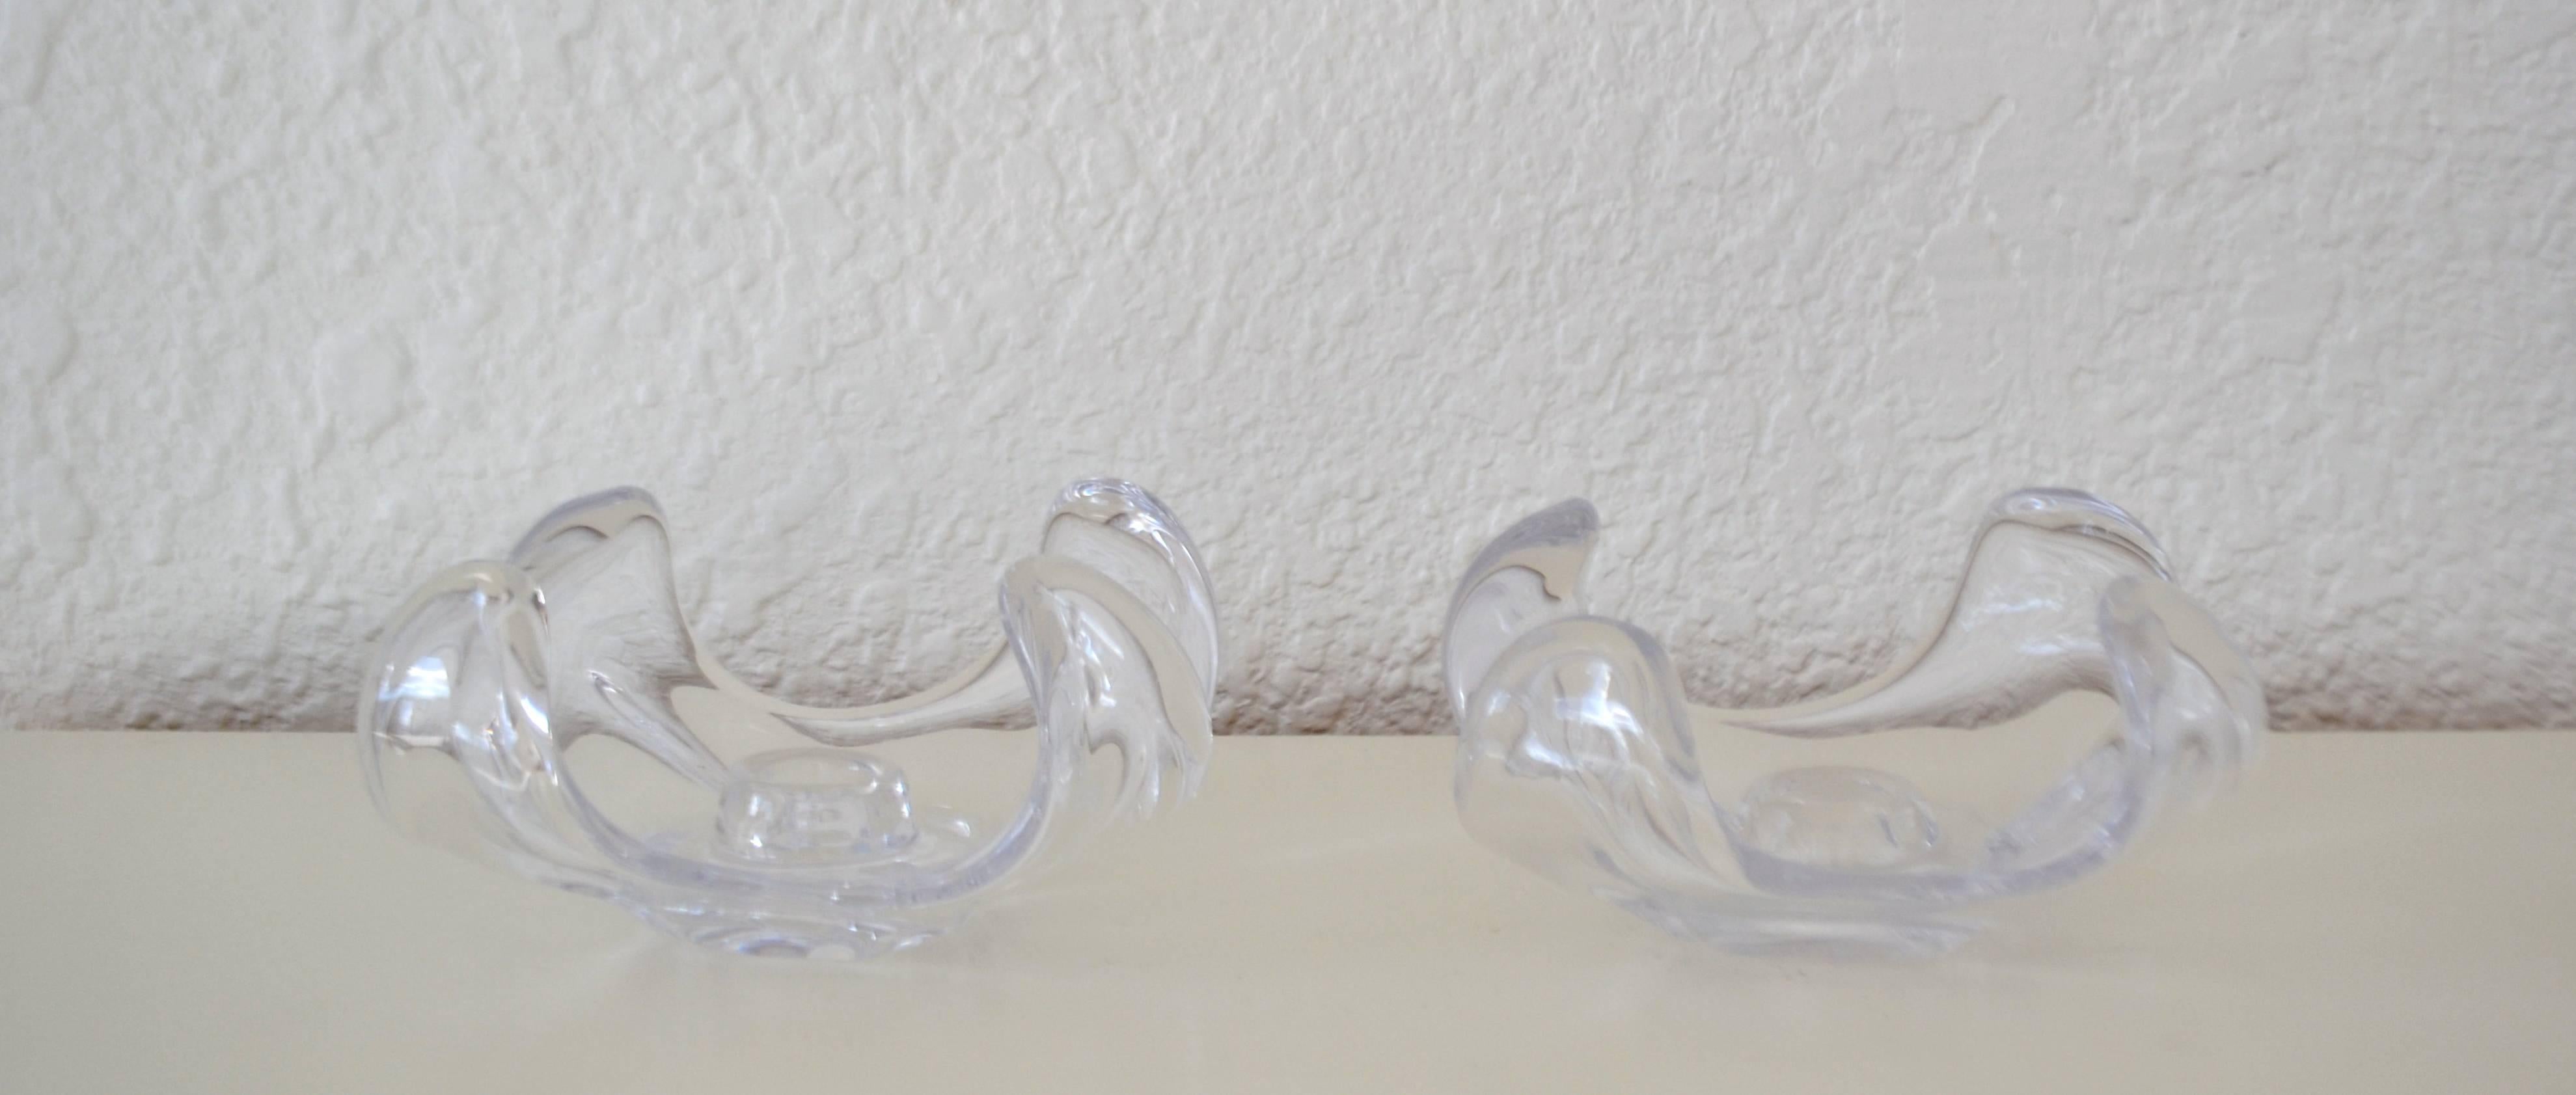 Pair of Italian Mid-Century Blown Glass Organic Form Candlesticks For Sale 2